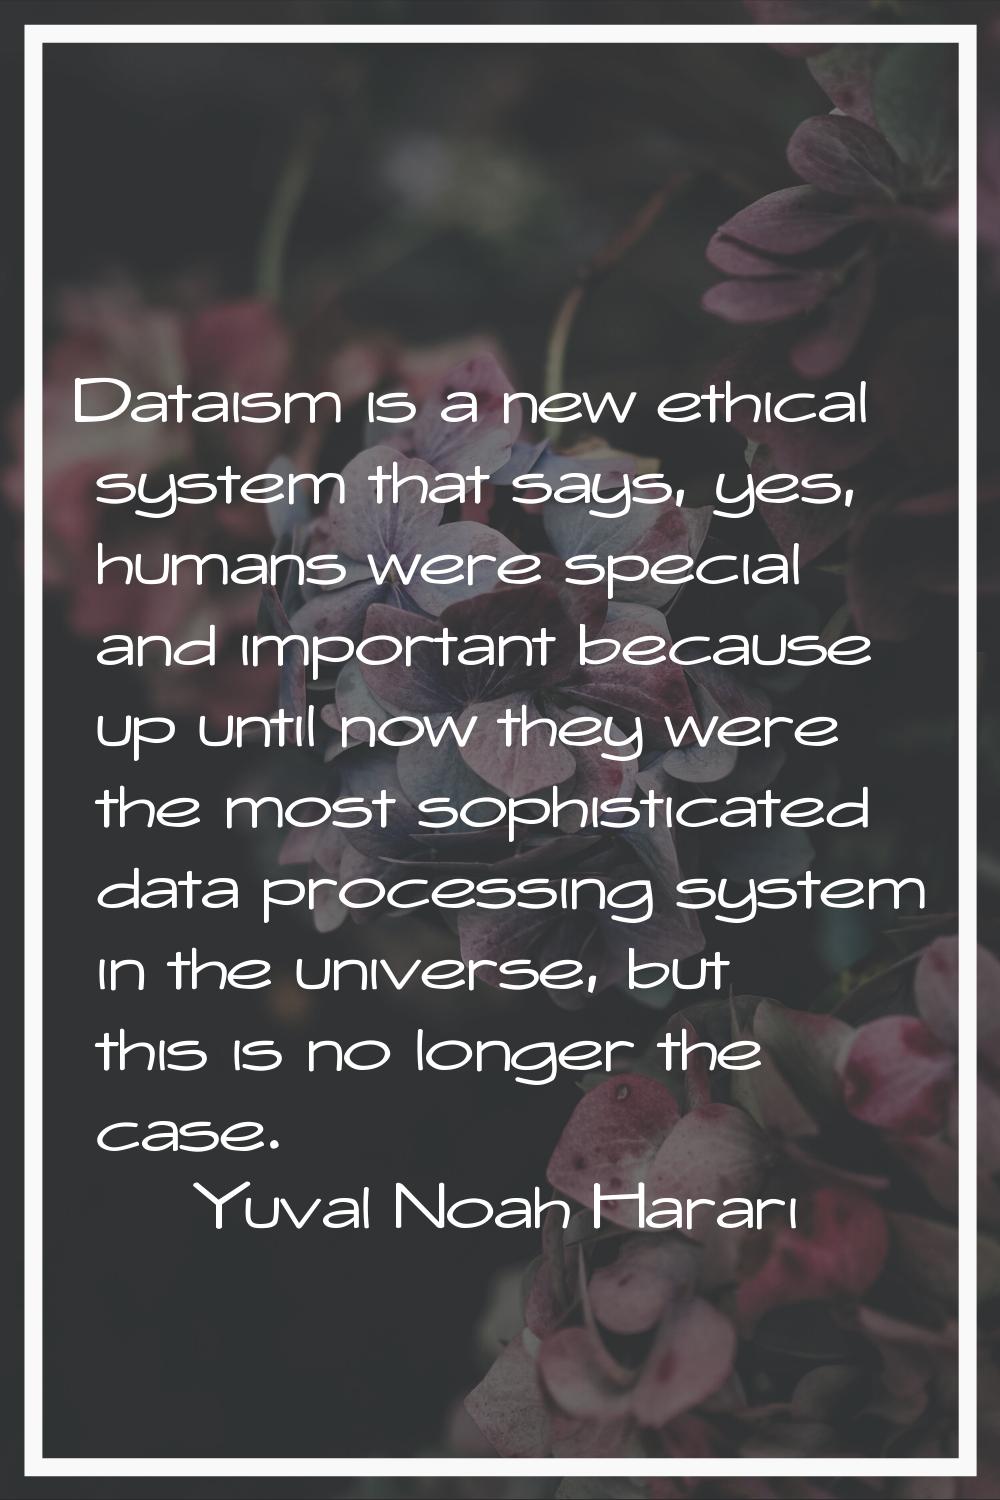 Dataism is a new ethical system that says, yes, humans were special and important because up until 